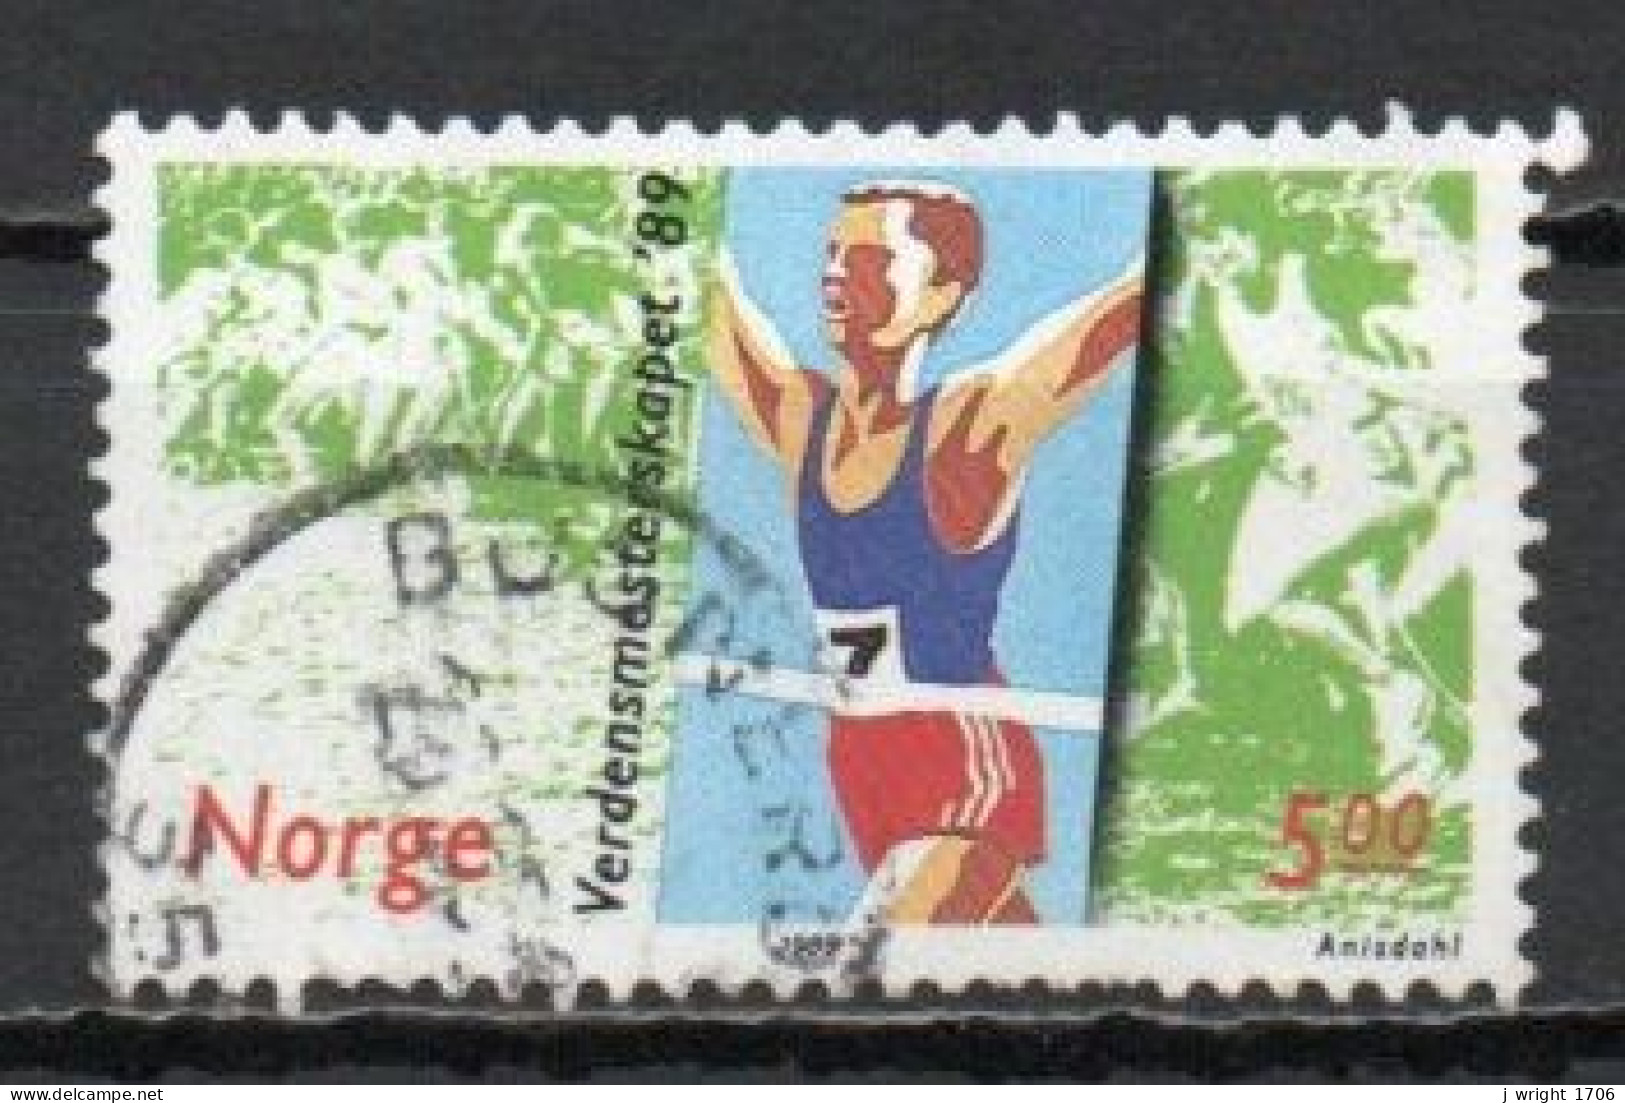 Norway, 1989, World Cross Country Championships, 5kr, USED - Used Stamps